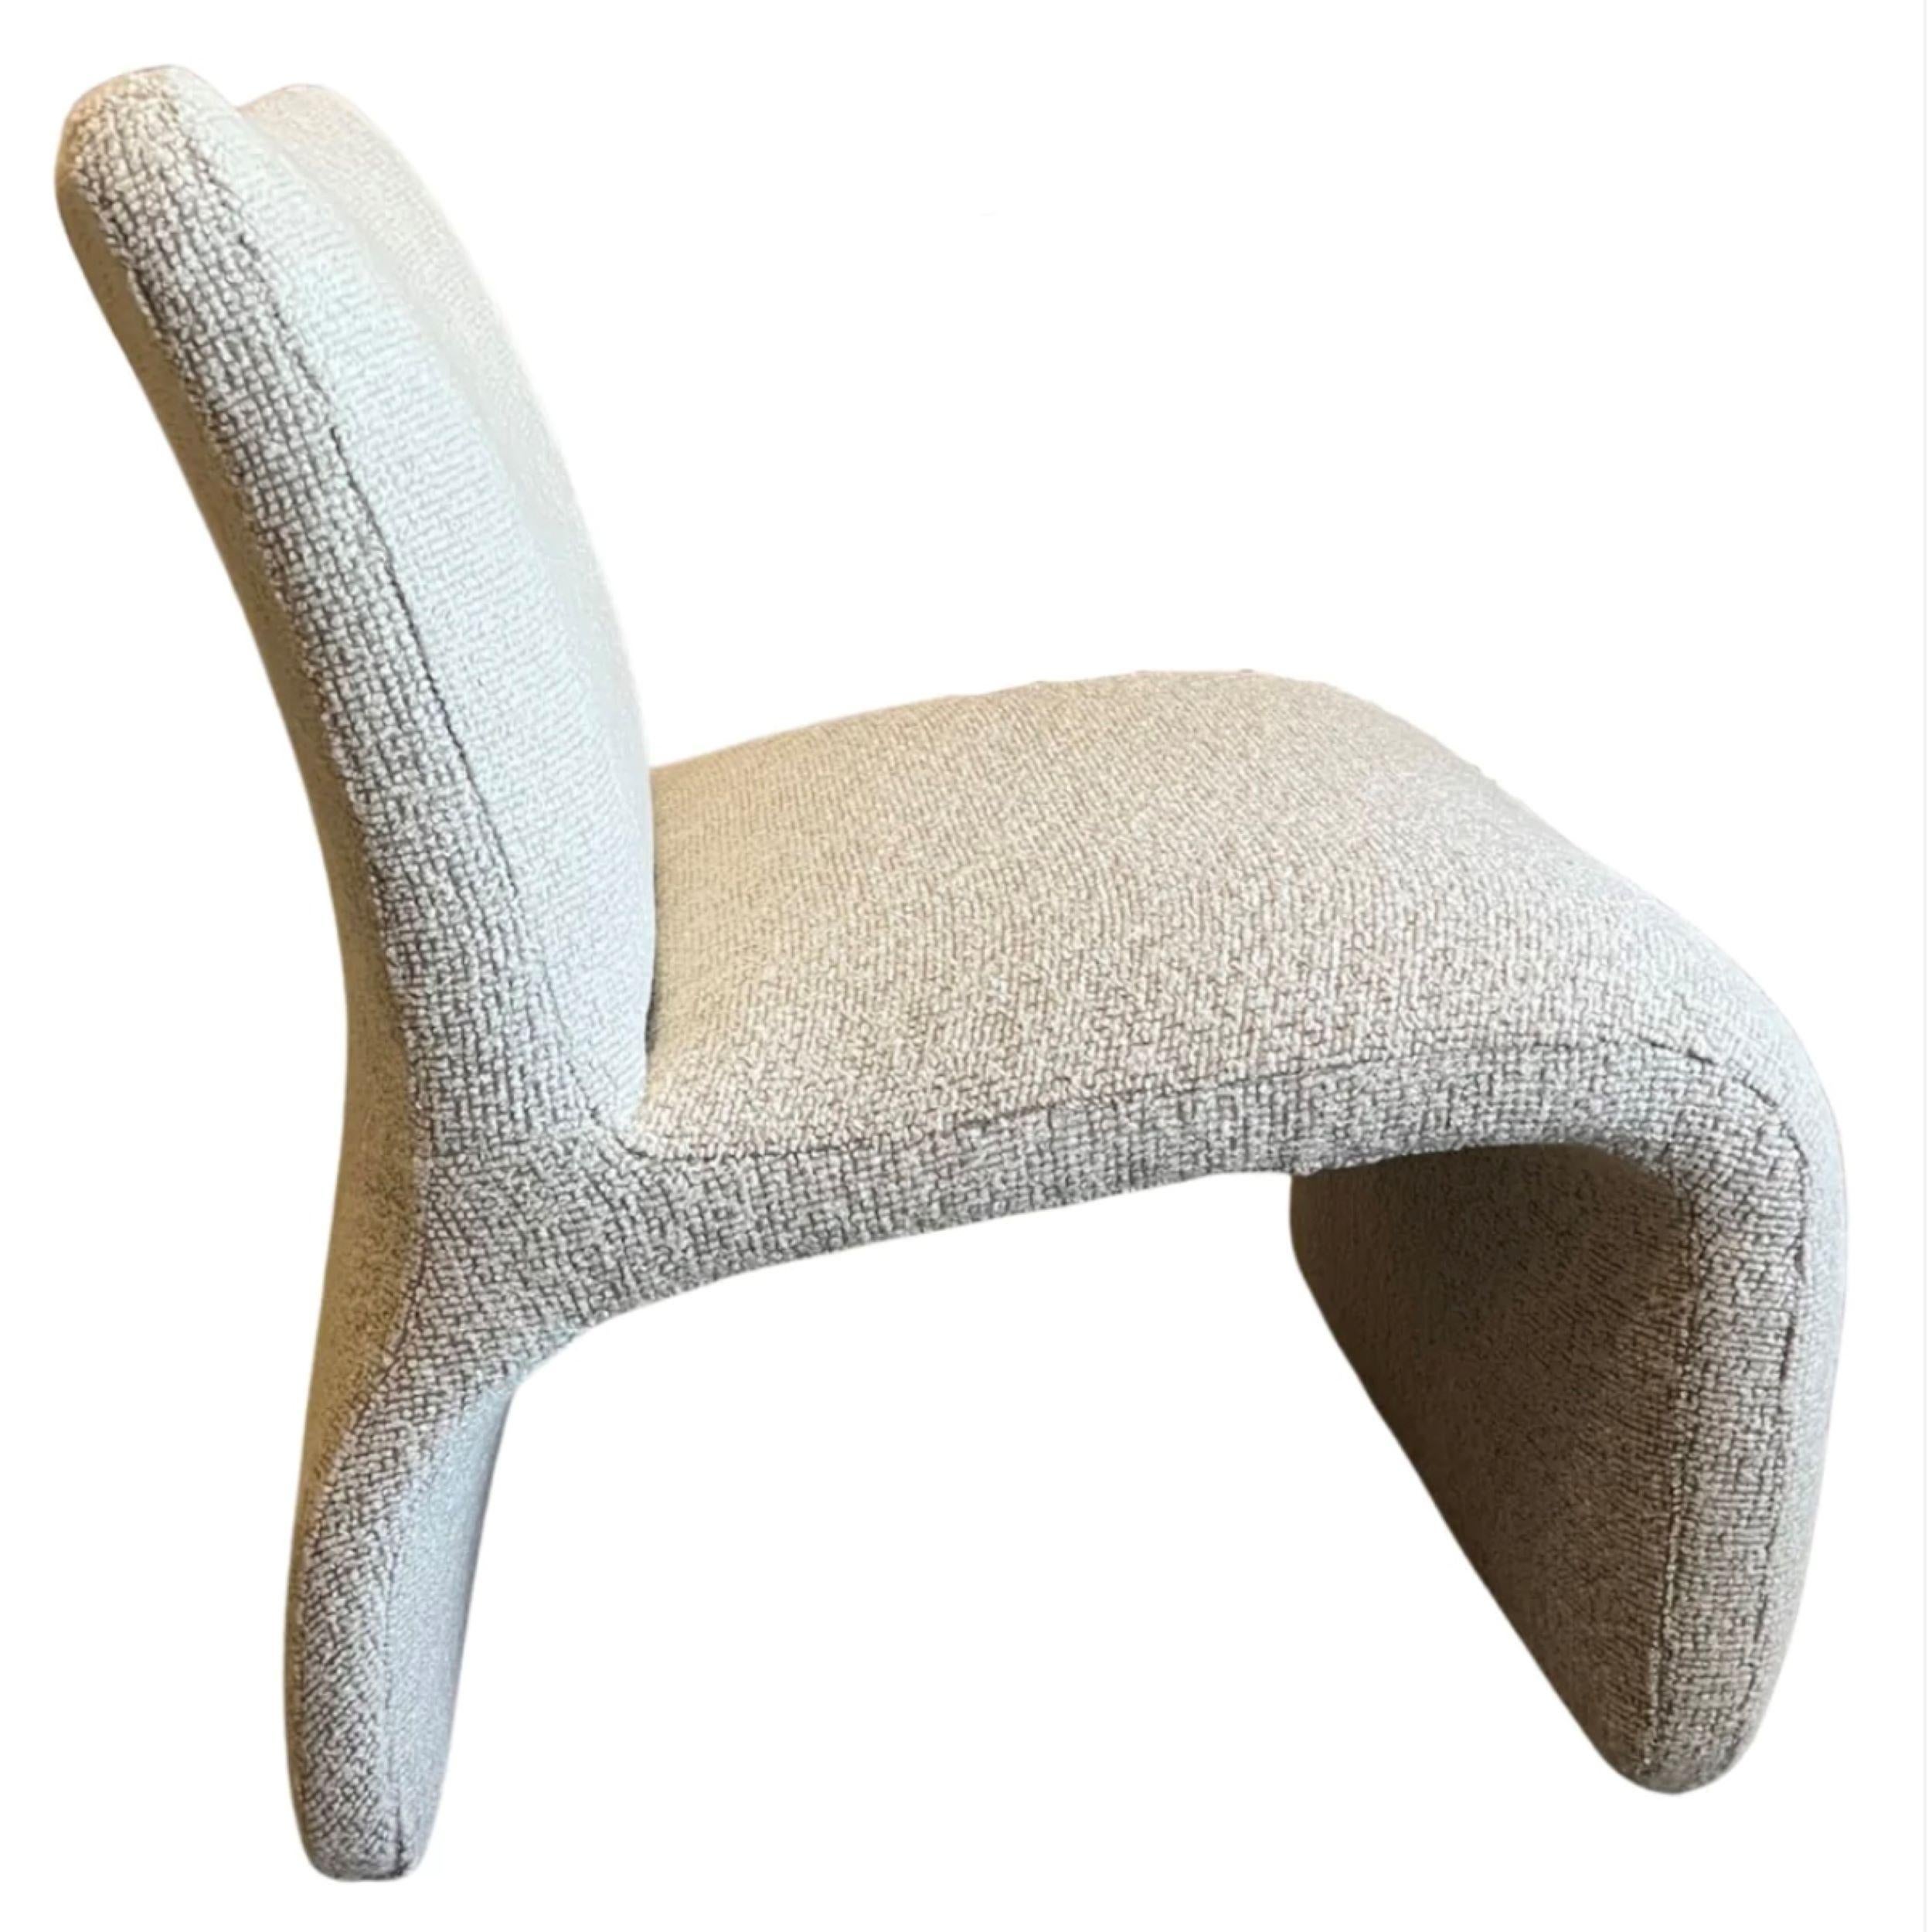 This is a pair of sculptural lounge chairs.

Attributed to Vladimir Kagan (Designer) & manufactured by Weiman Preview Furniture
1980's

The chairs were just reupholstered with a beautiful, neutral, Oatmeal Tones Fabric

The shapes are very